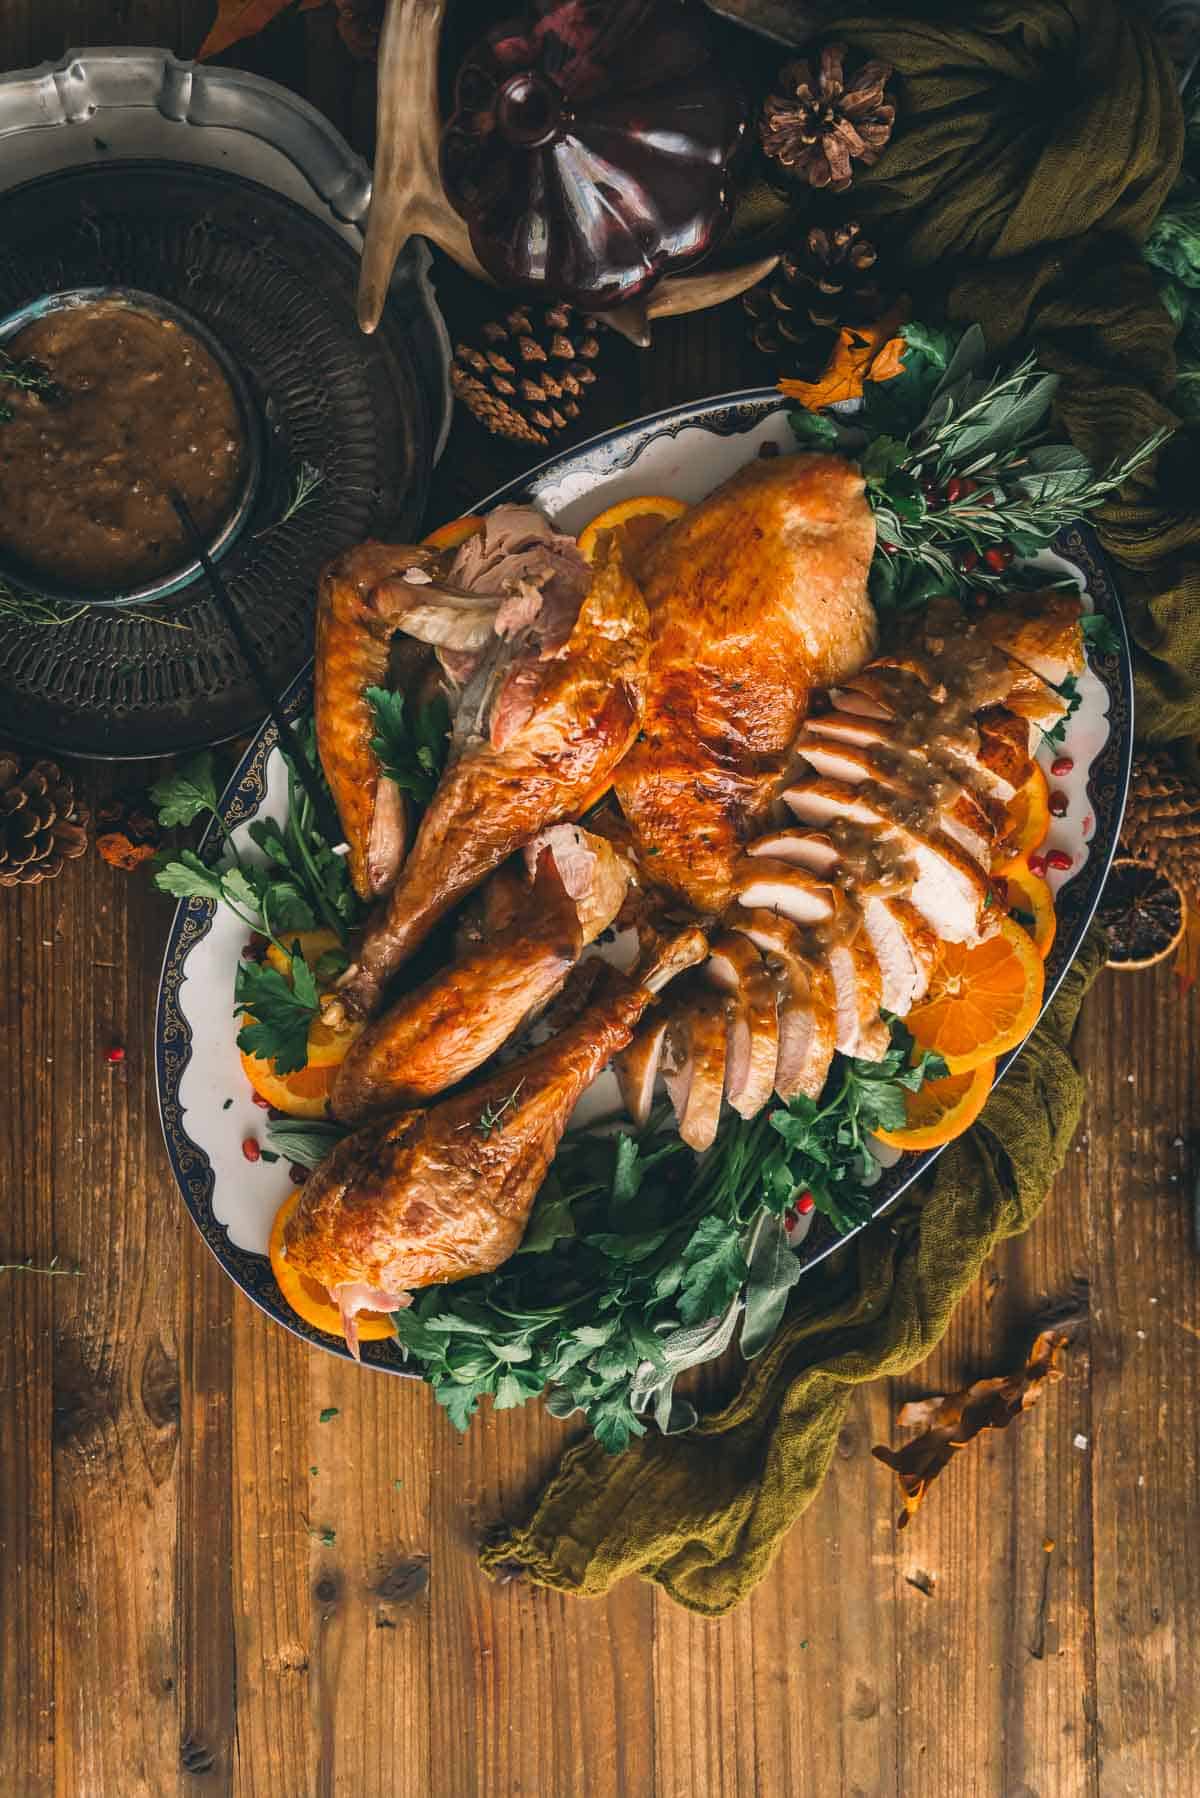 How To Carve A Turkey Step By Step Guide With Video Foods Are Good